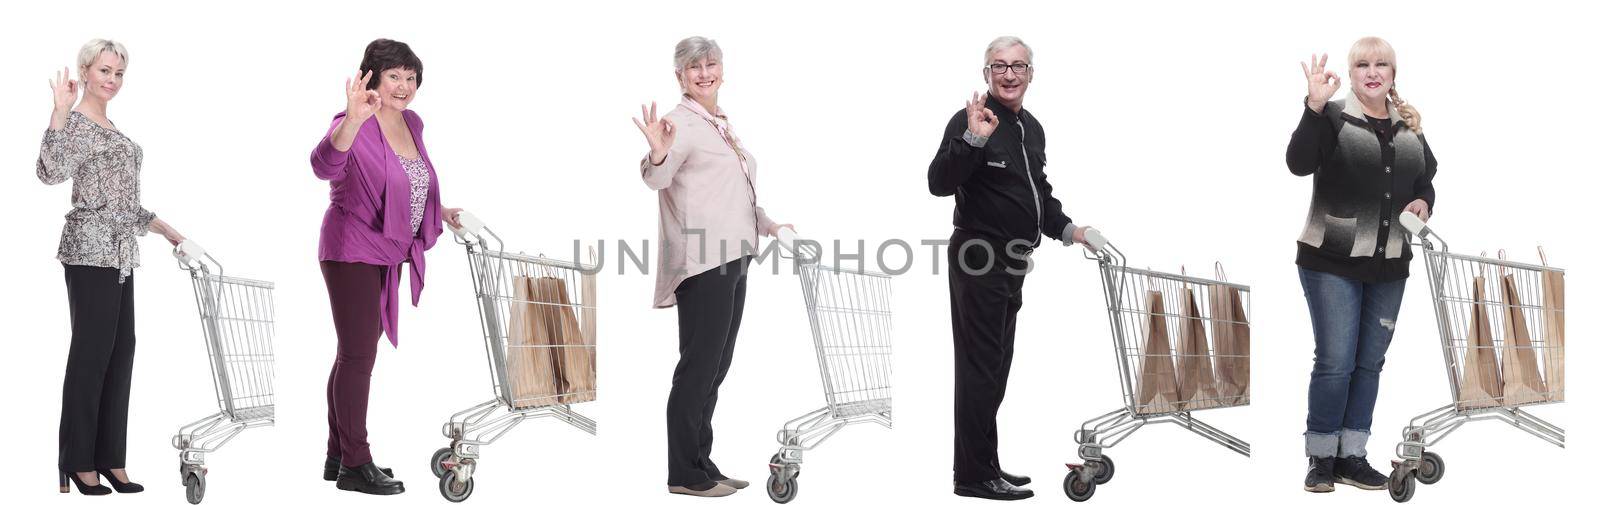 group of people in profile with shopping cart isolated by asdf